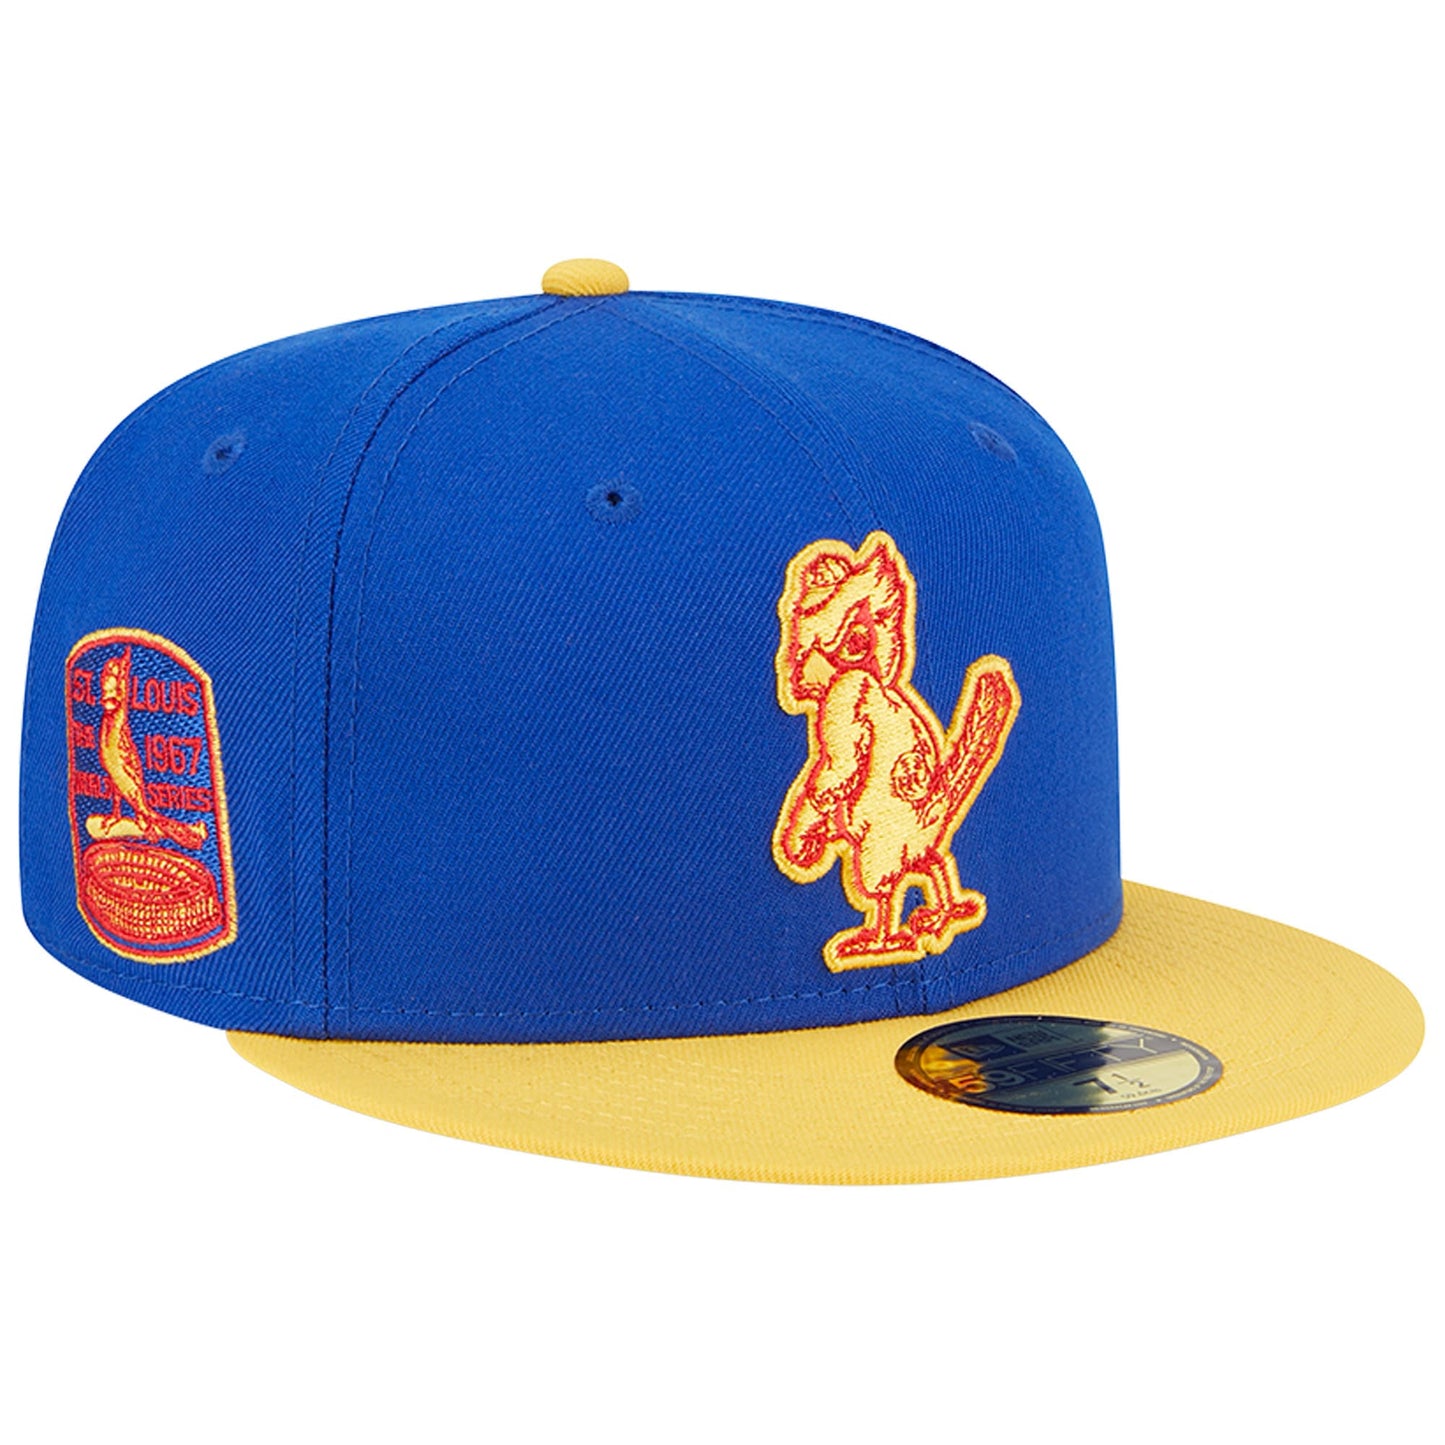 St. Louis Cardinals New Era Empire 59FIFTY Fitted Hat - Royal/Yellow